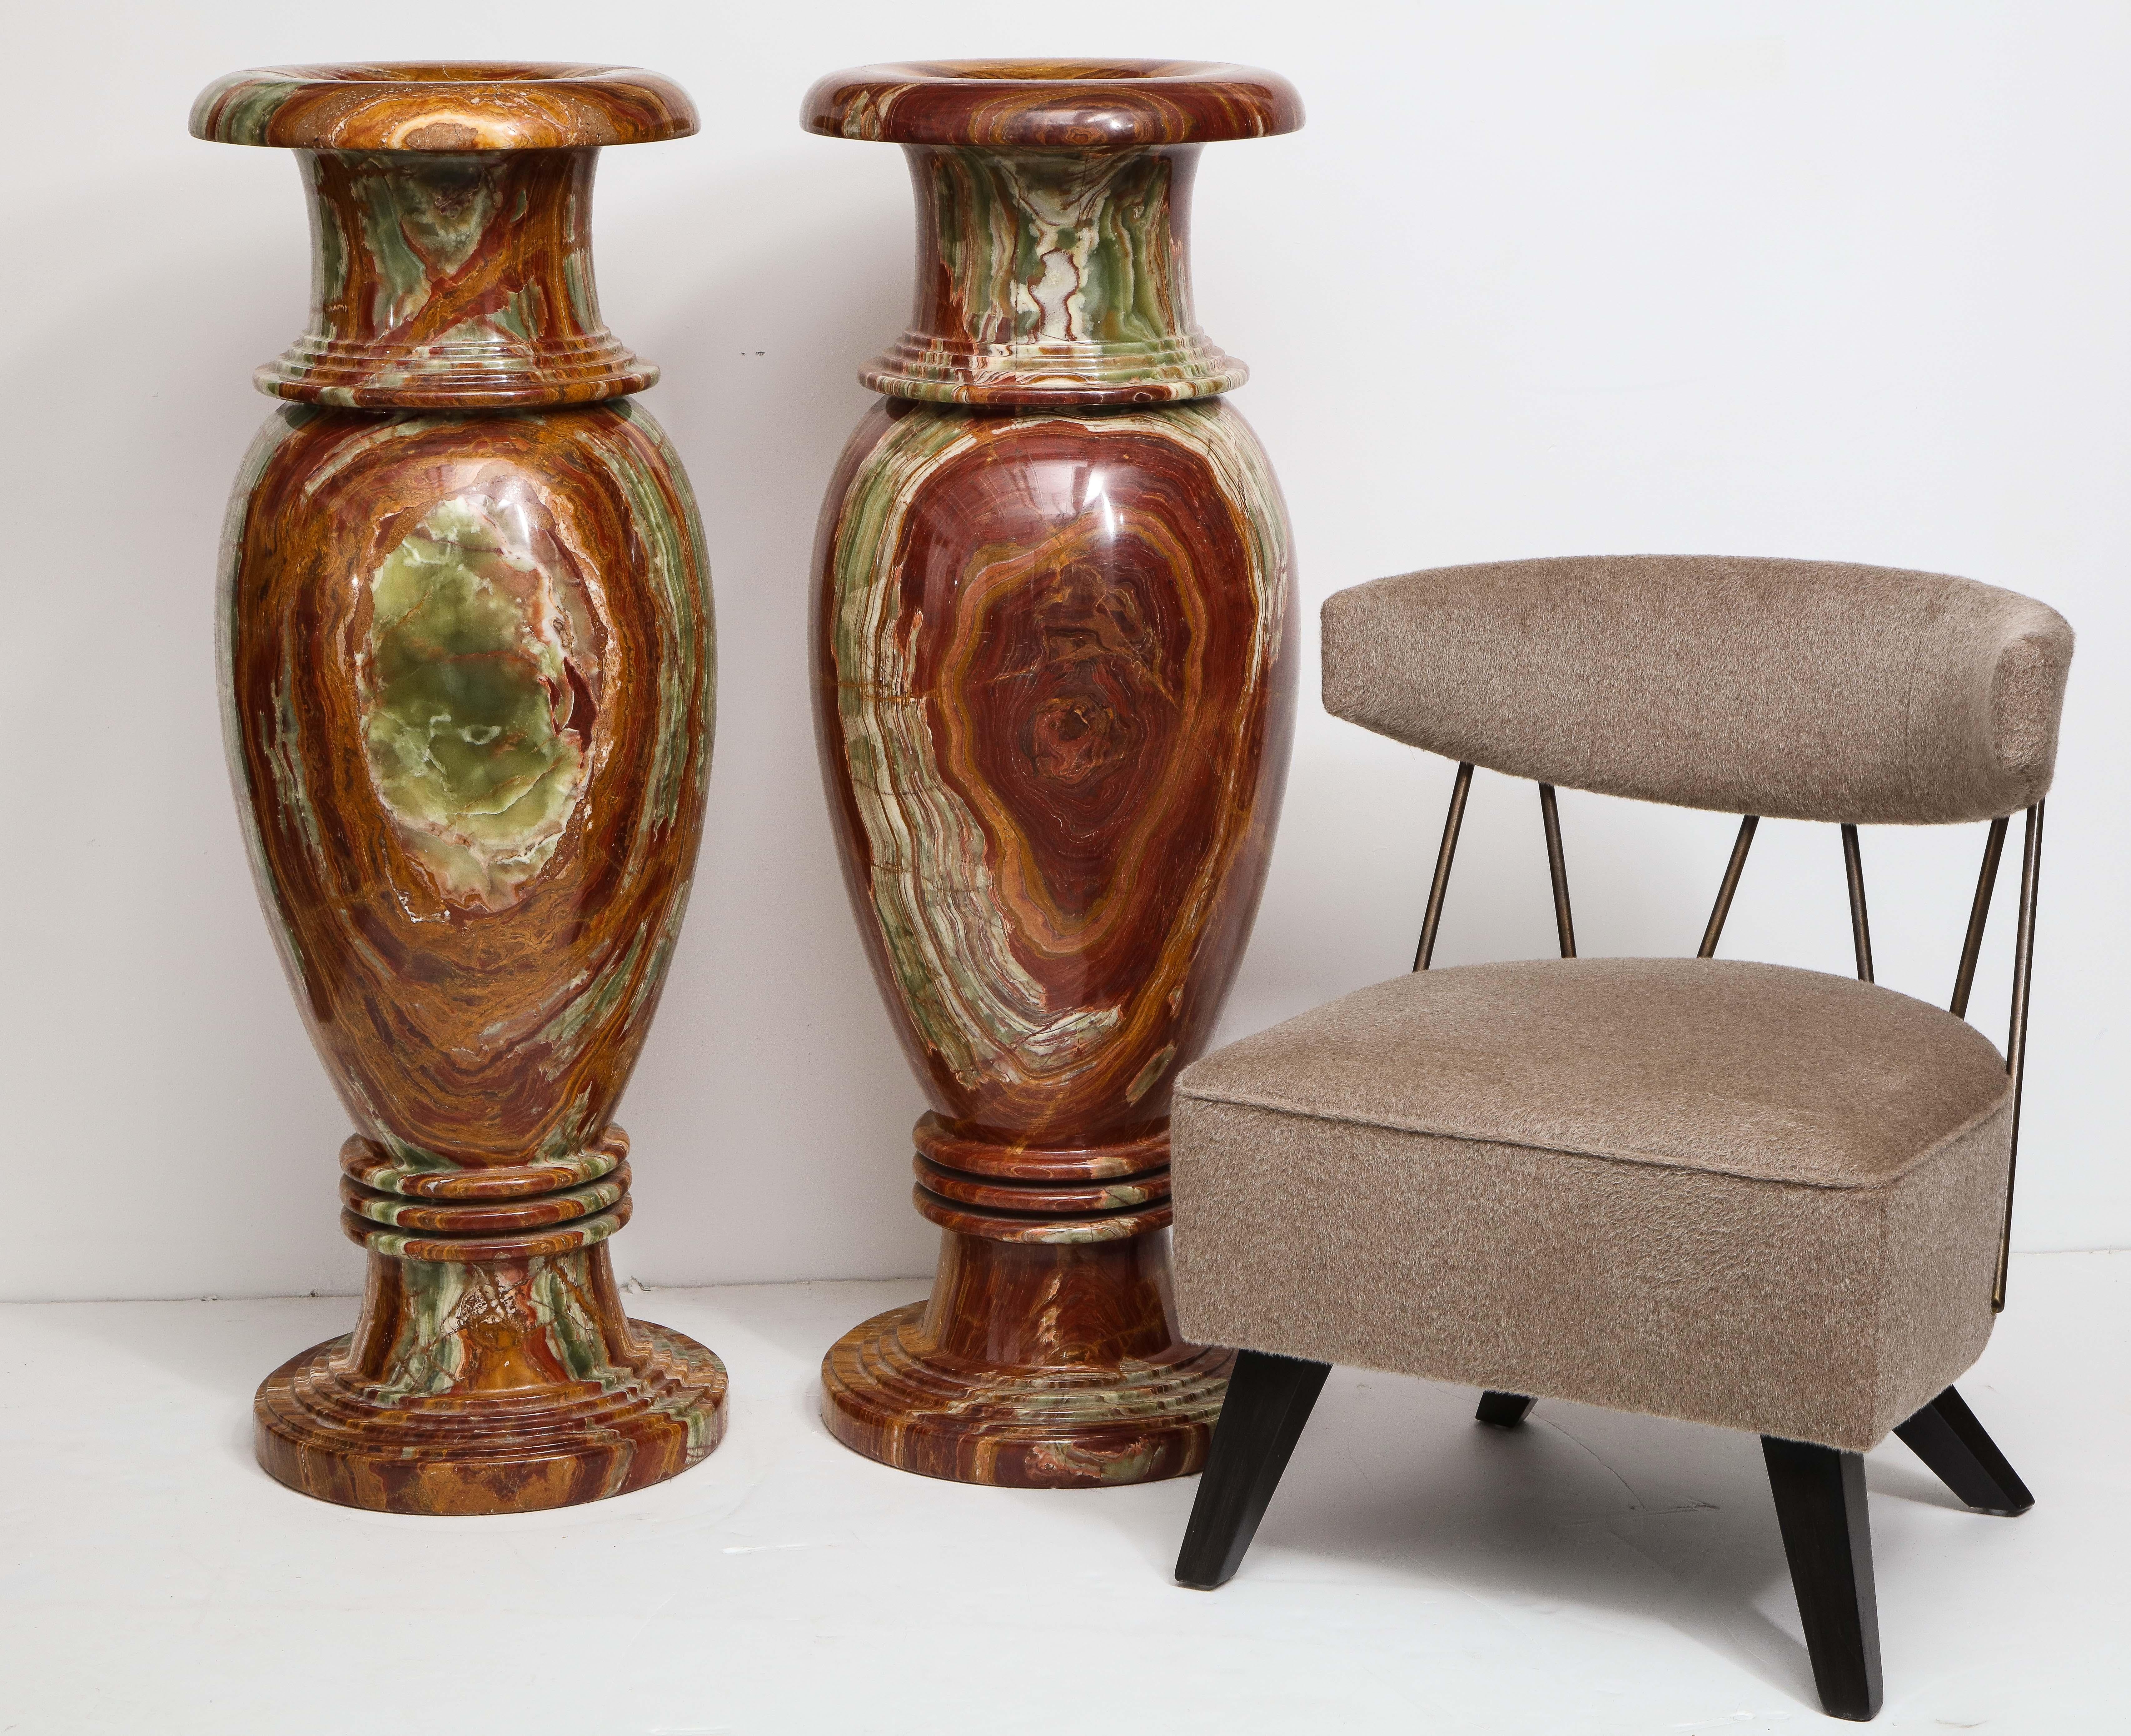 Stunning pair of monumental Italian onyx floor urns in the
neoclassic style.
See image 2 for the size.
 